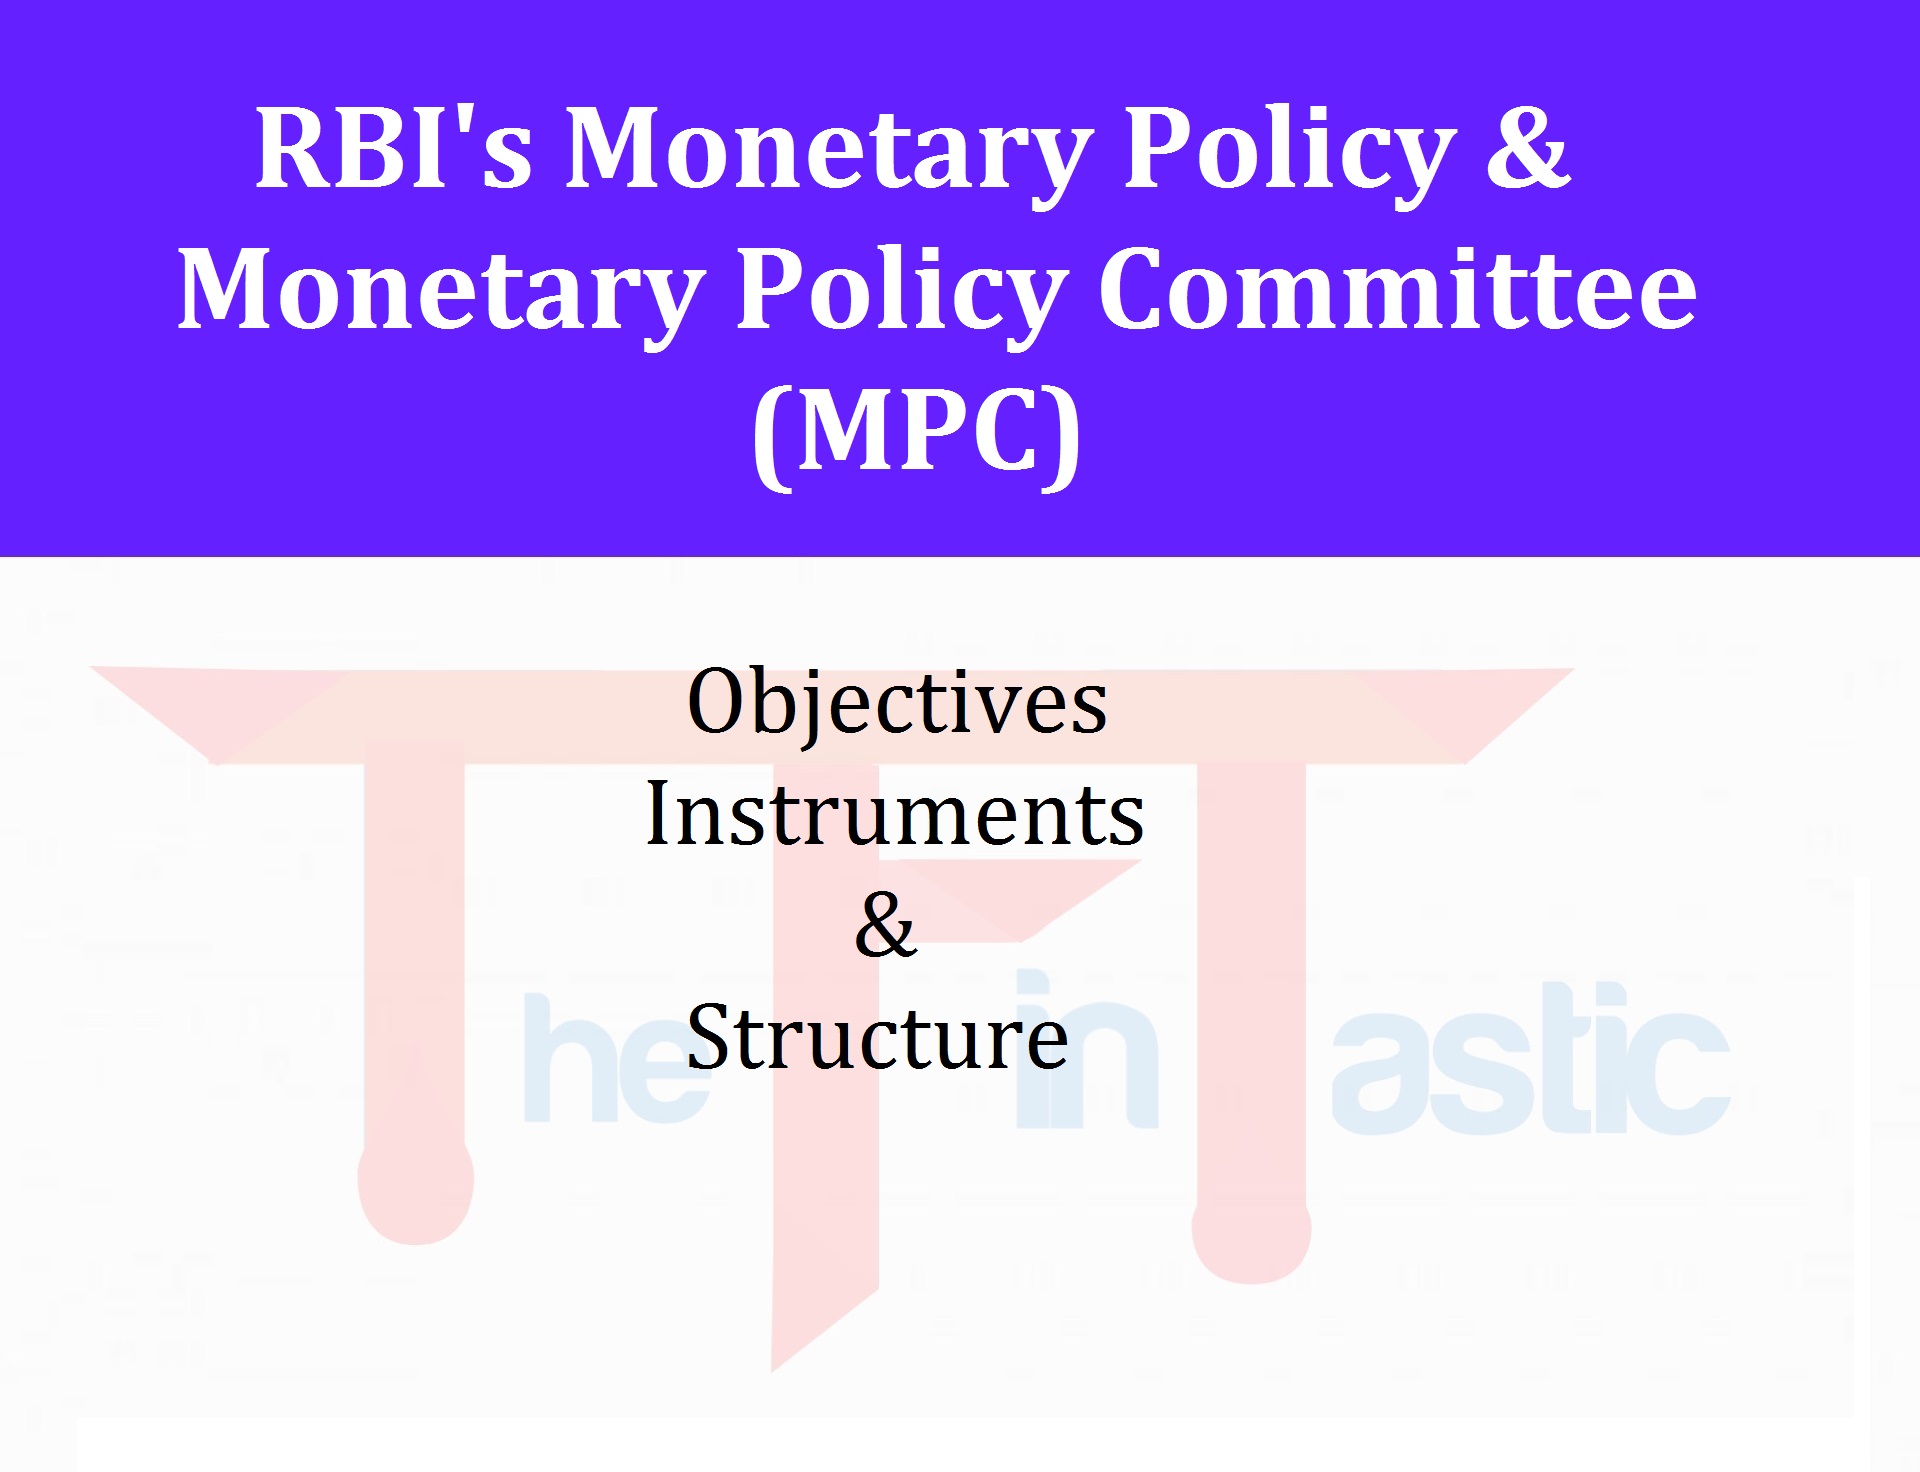 RBI's Monetary Policy & Monetary Policy Committee (MPC): its Objectives, instruments & Structure